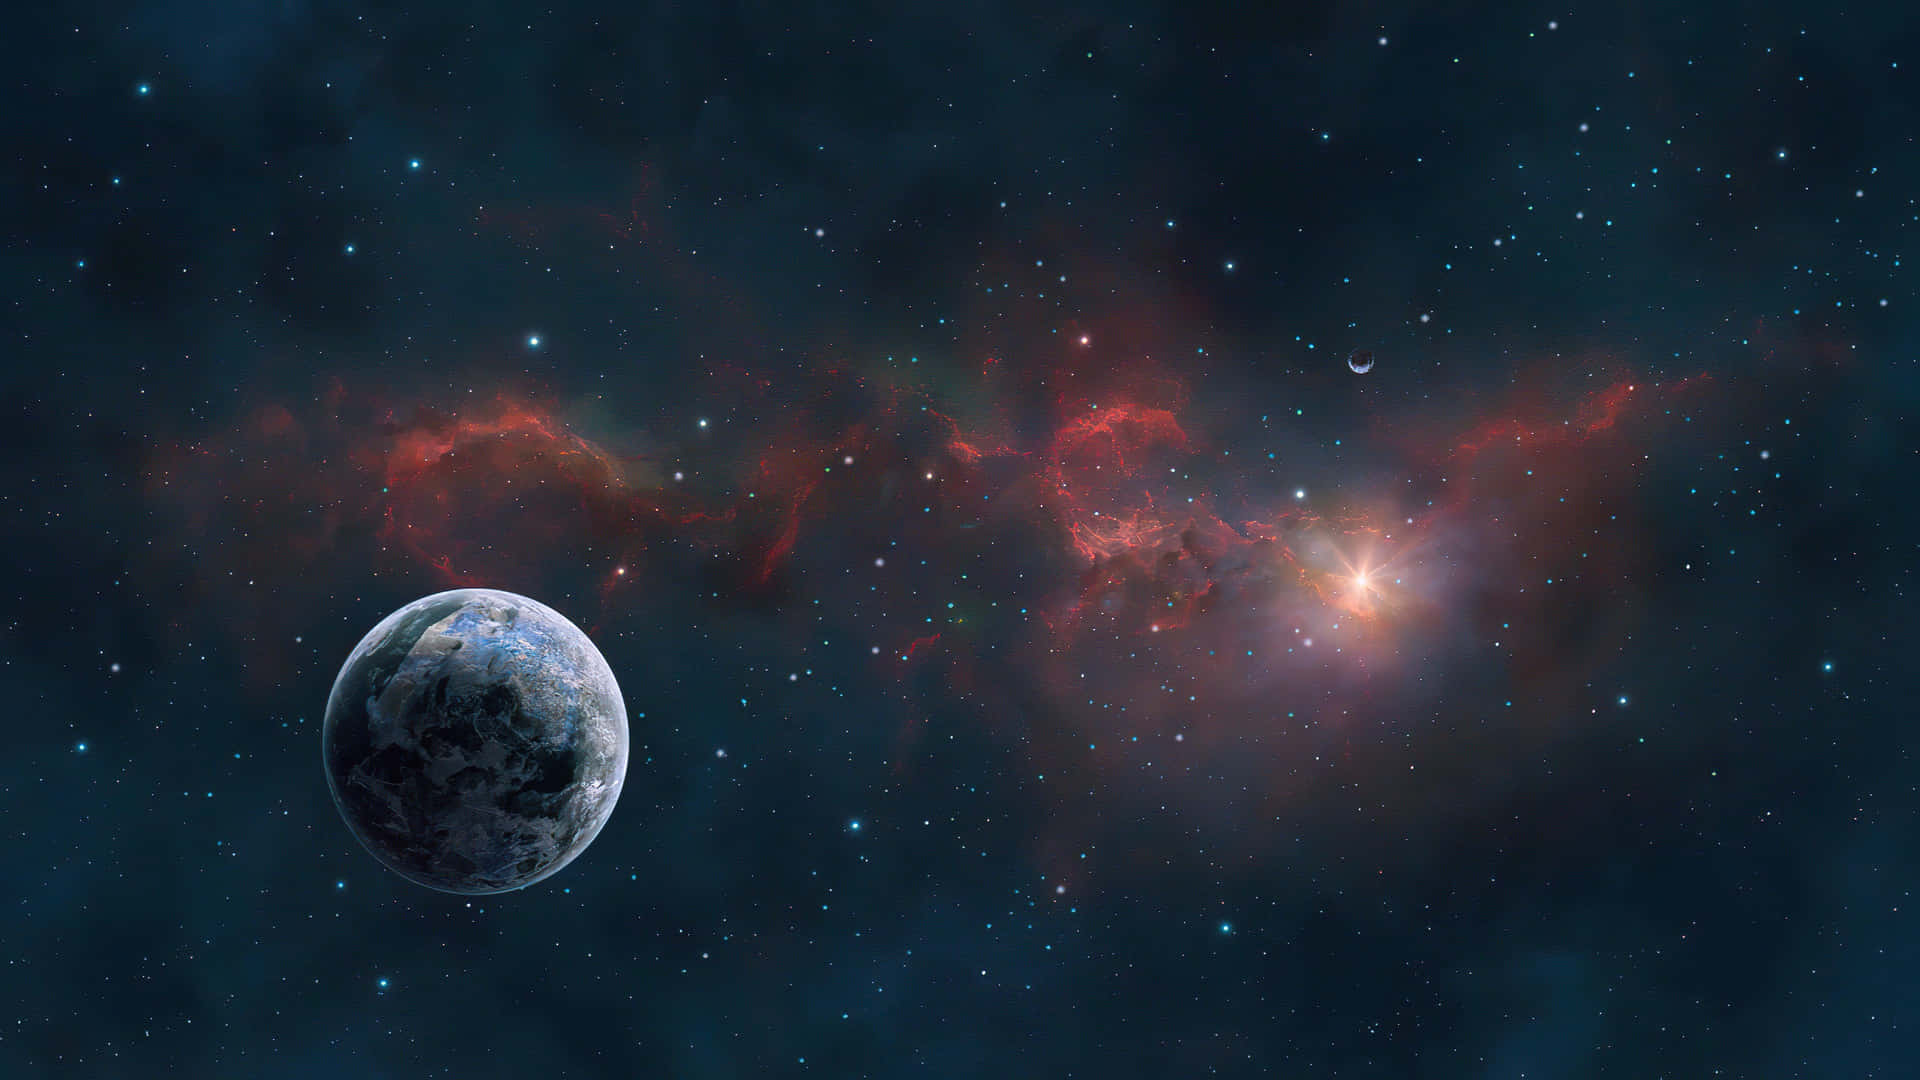 Feel the power of the universe with this captivating outer space scene. Wallpaper